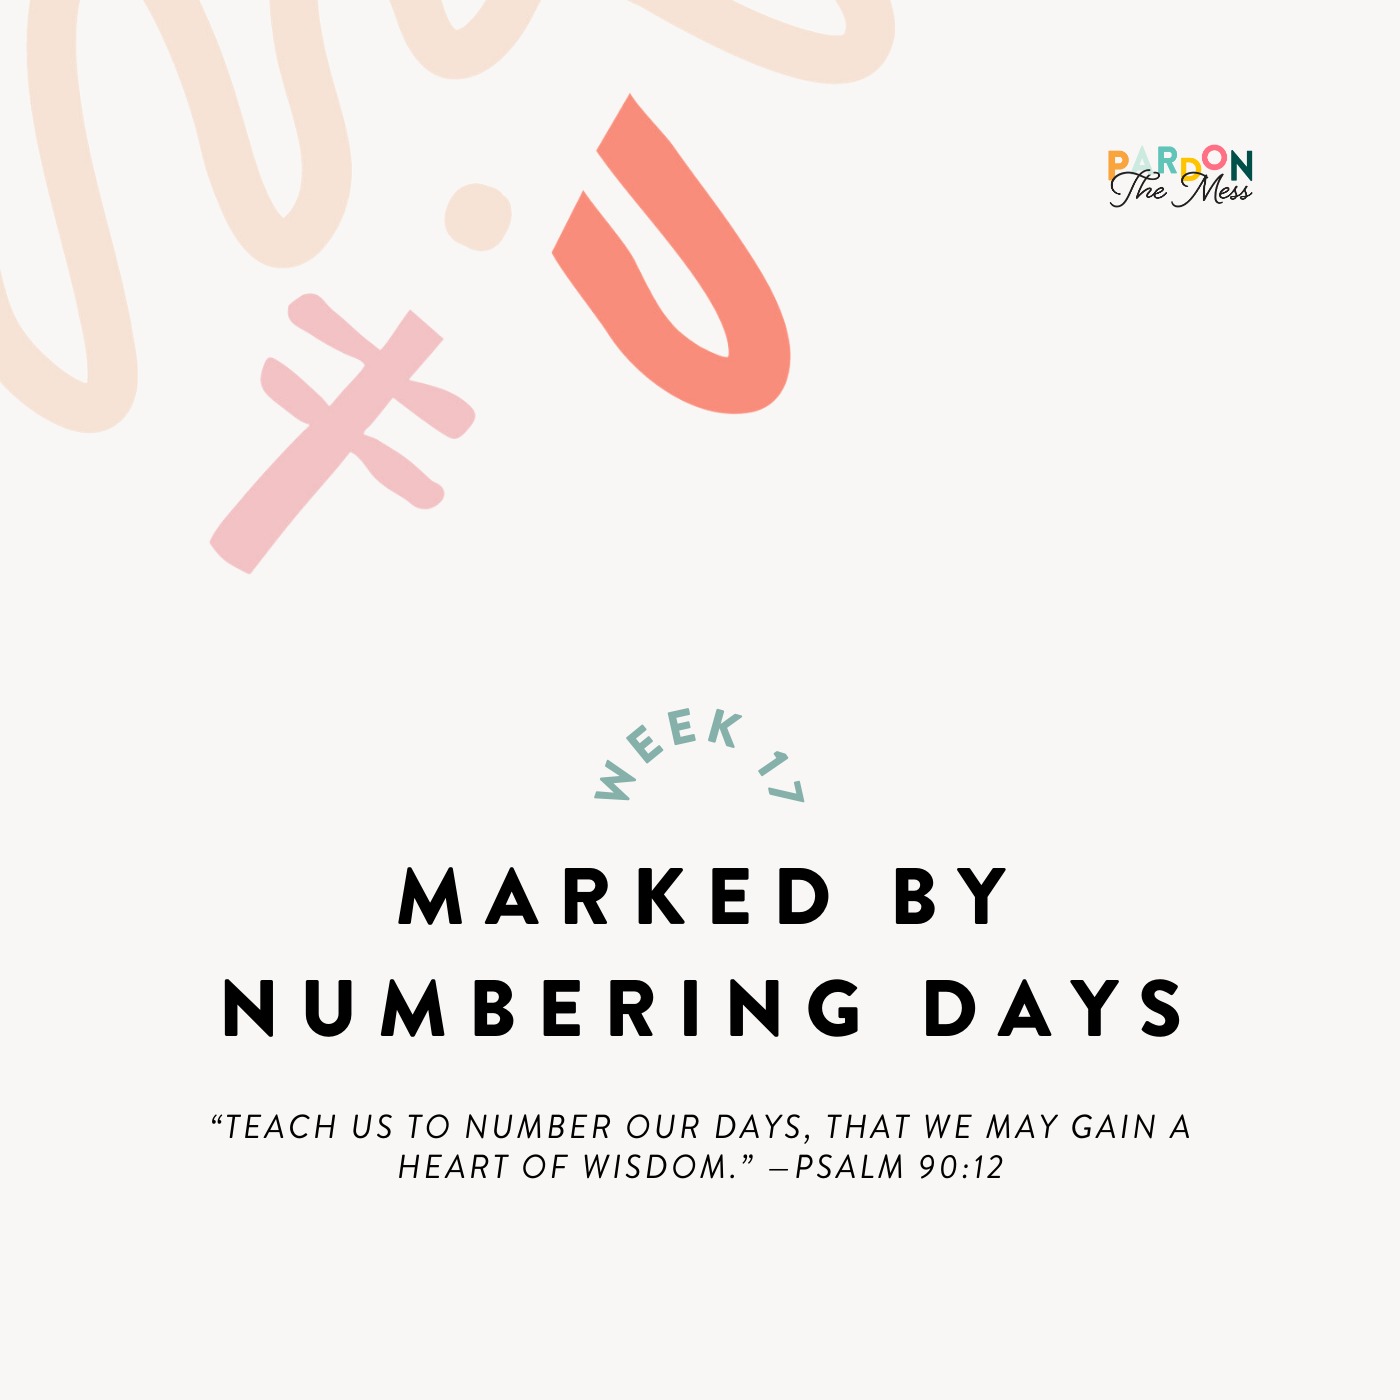 BONUS: Marked by Numbering Days